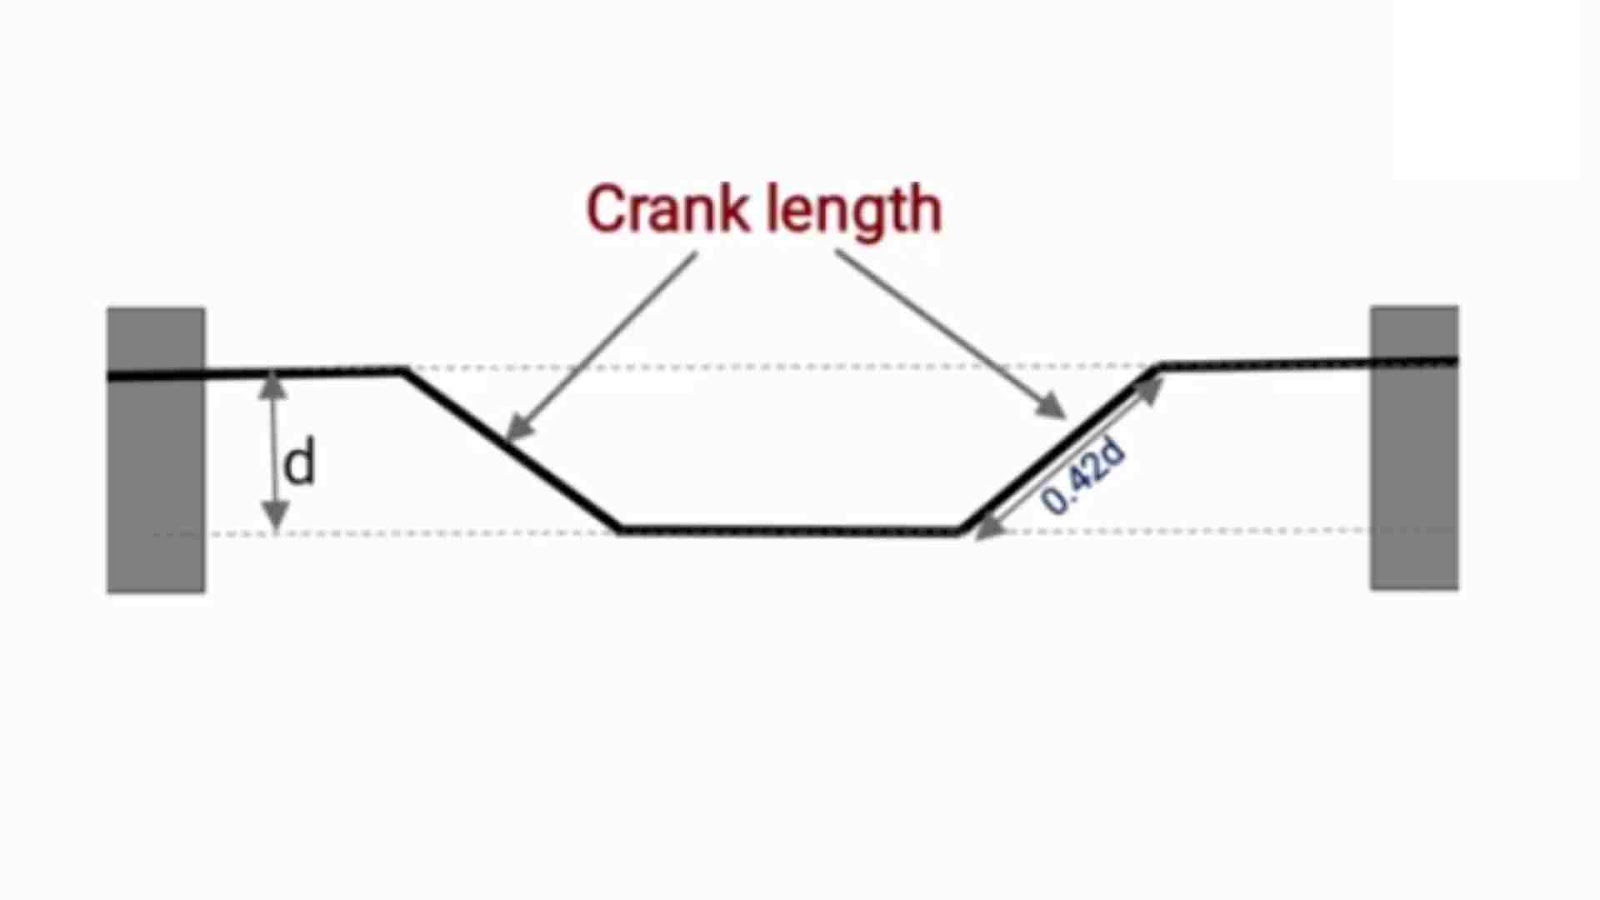 Cutting length of cracked bar